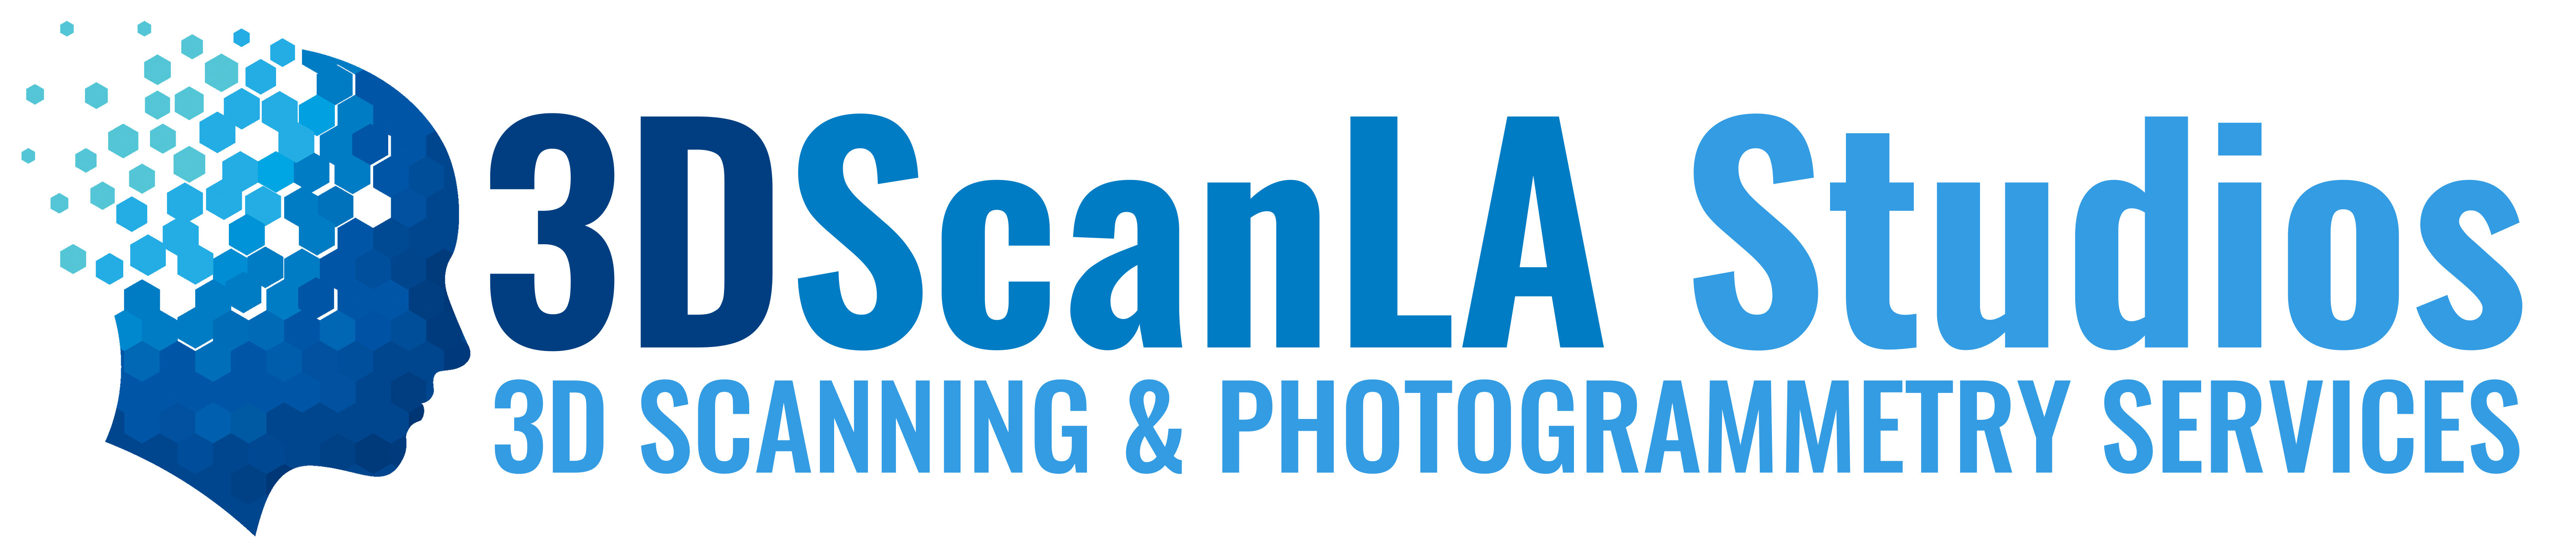 3D Scanning Los Angeles, Photogrammetry Services Los Angeles